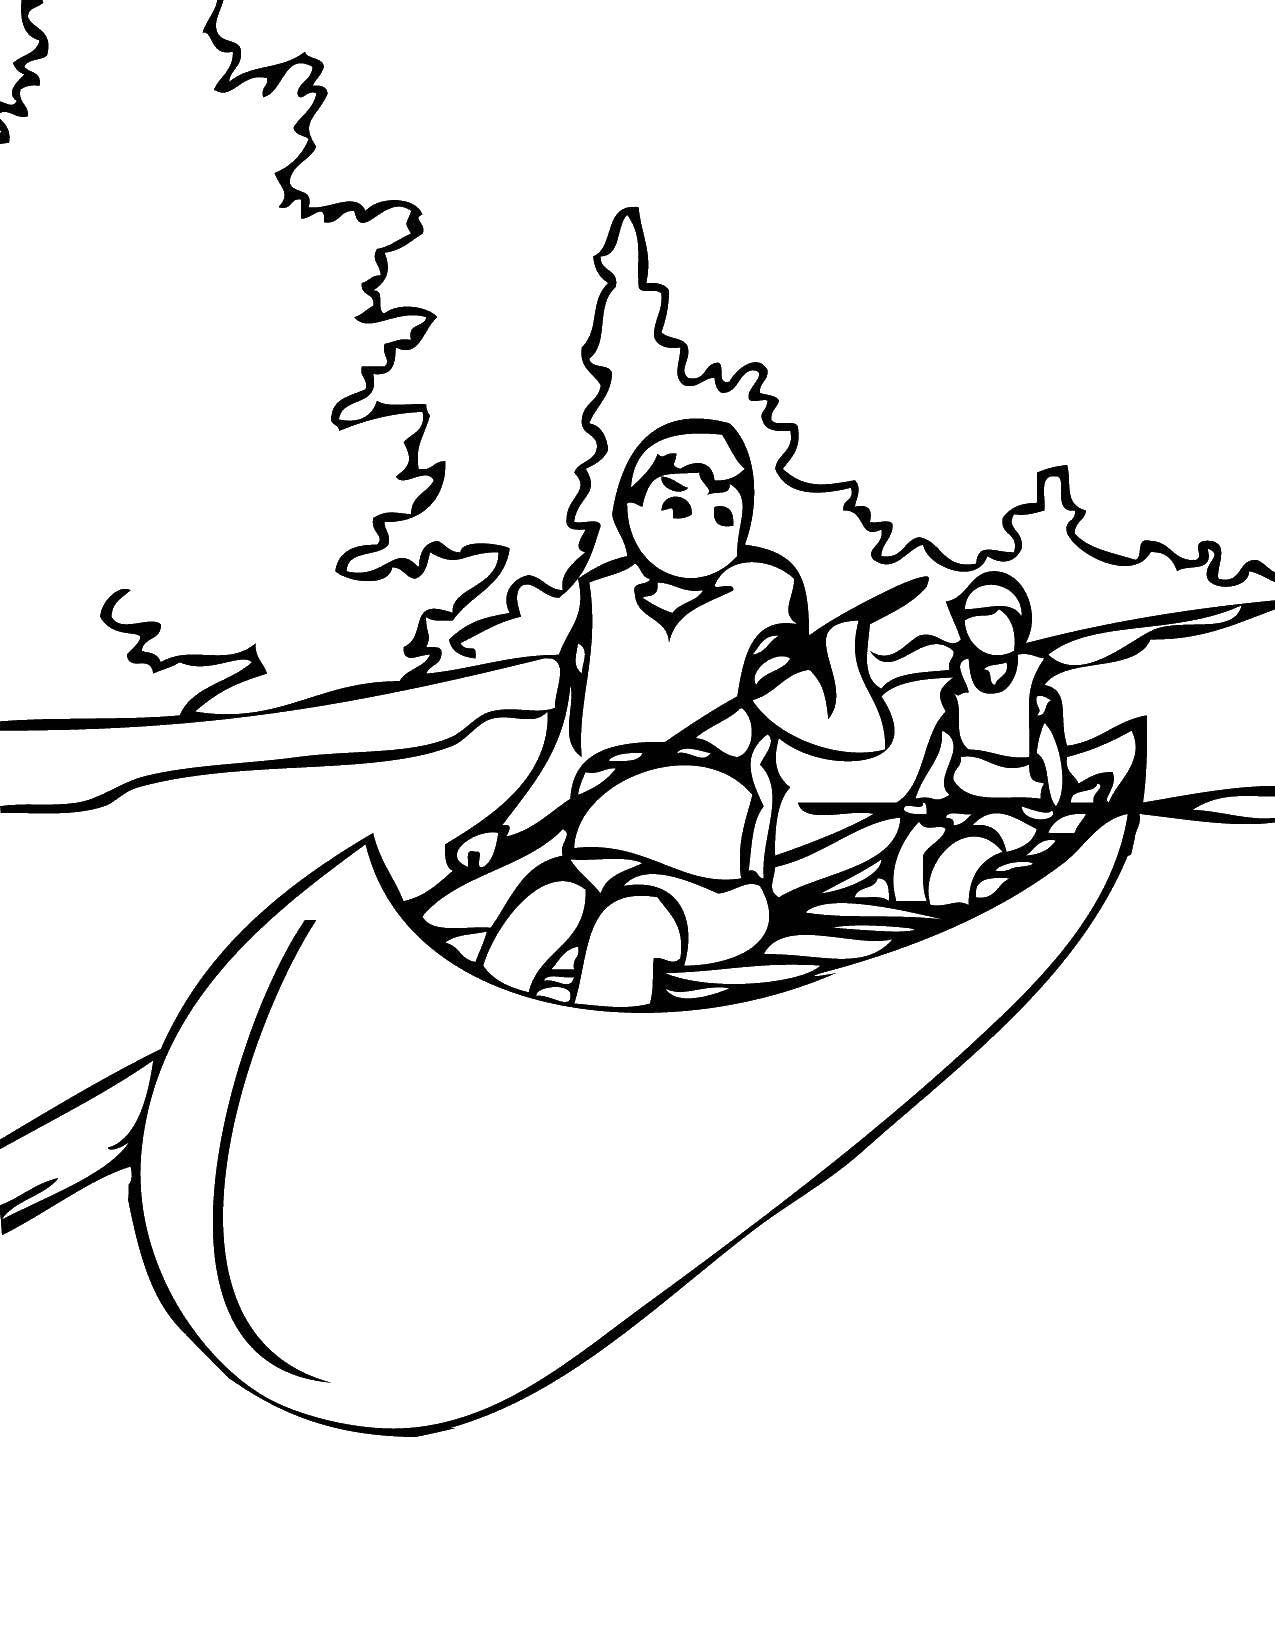 Coloring Canoe. Category Sports. Tags:  Sports, water.